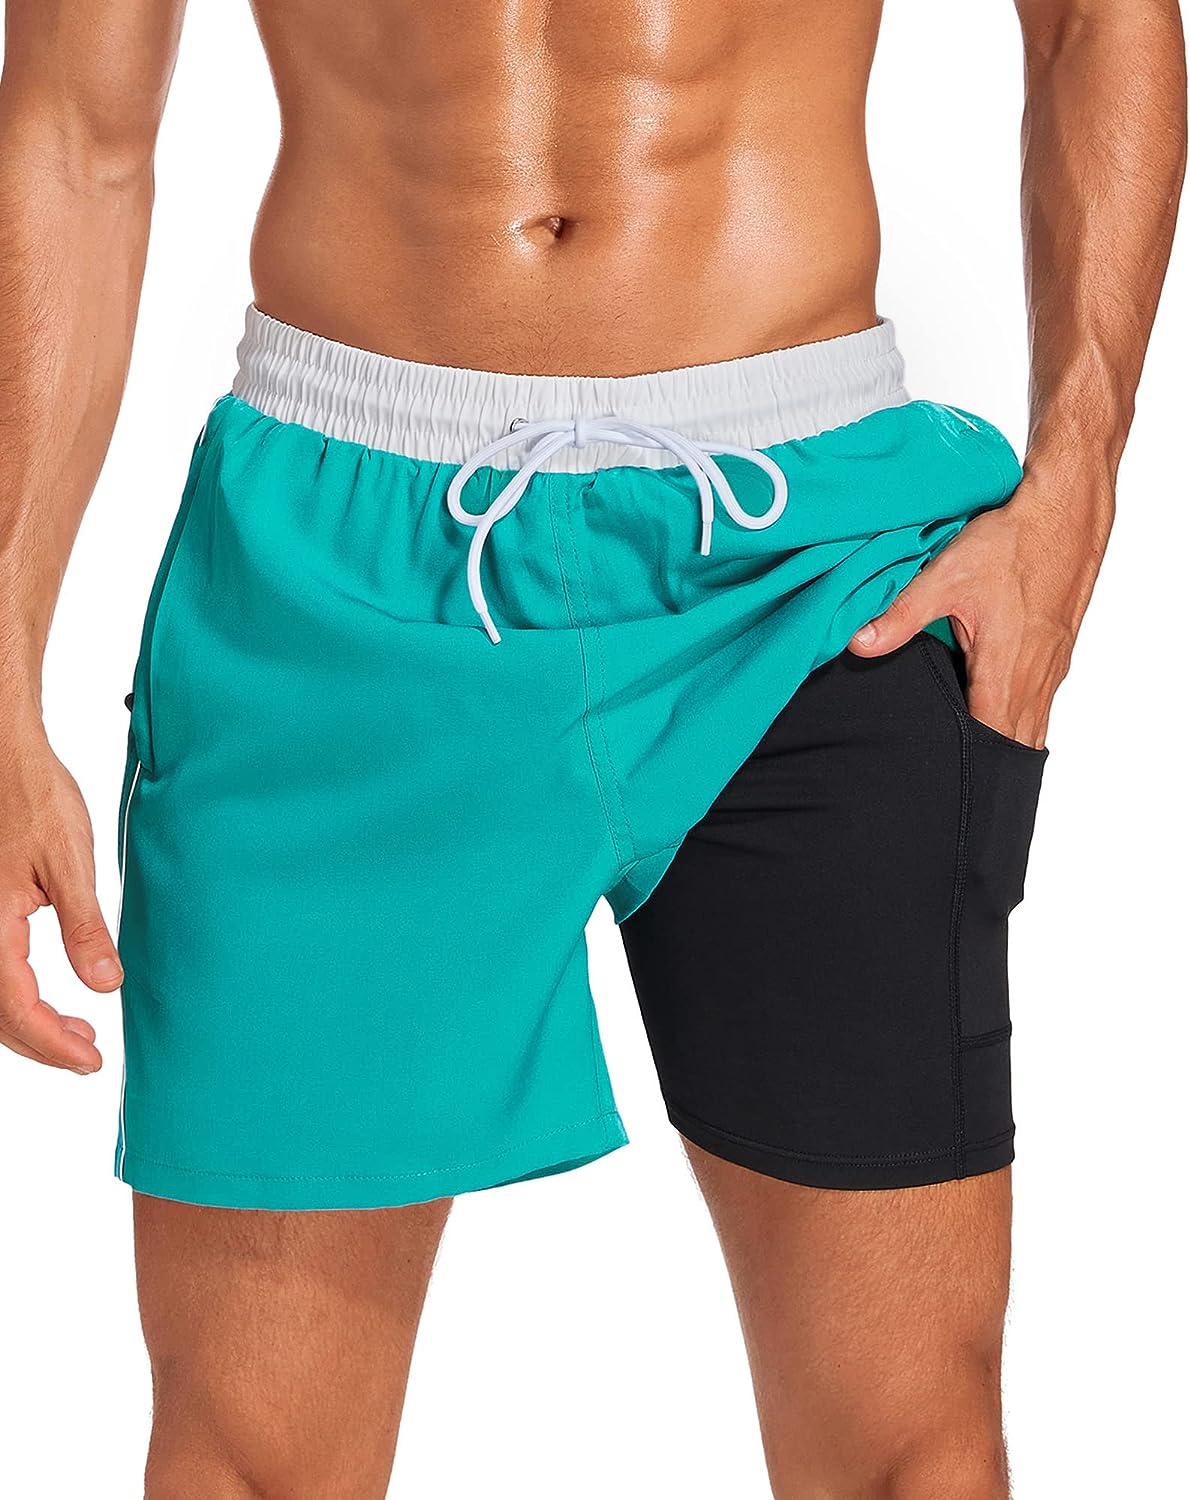 difficort Mens Swim Trunks with Compression Liner Quick Dry